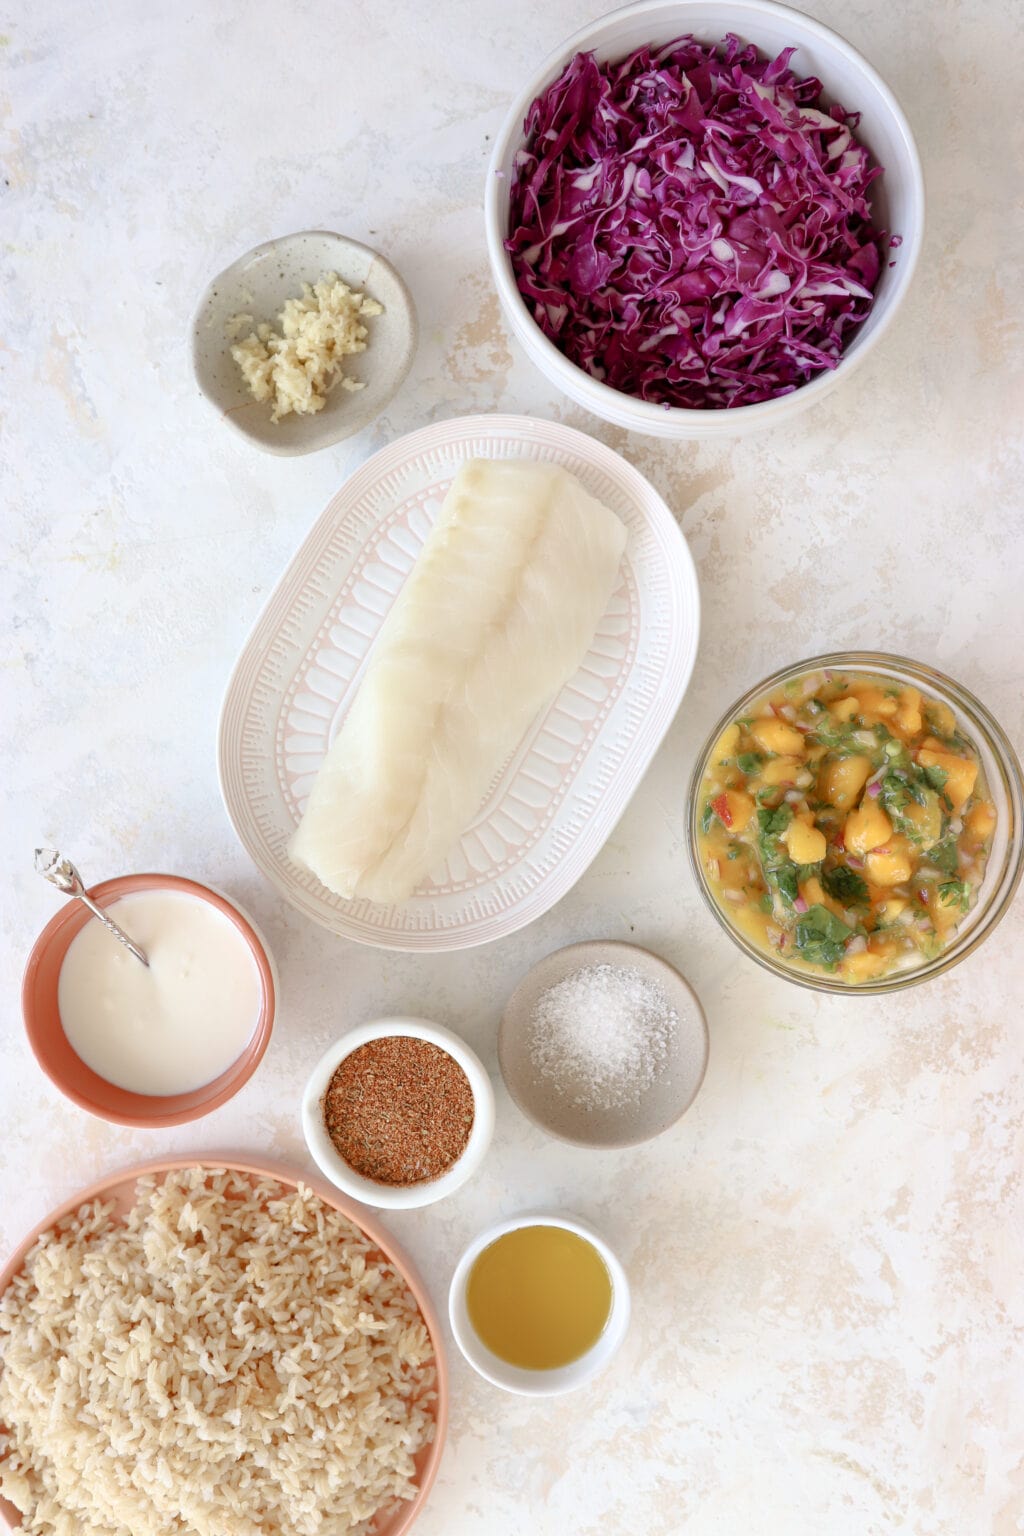 Overhead shot of ingredients for a cajun fish taco bowl recipe. In a 10 ounce white bowl is shredded purple cabbage, to the left is a 3 ounce bowl with minced garlic, to the right of that (in the center of the image) is a pink plate with raw white fish on it, to the right of that is a clear bowl with yellow and green salsa. Below the fish is a red ceramic bowl with lime crema and a spoon. Beside that is a 3 ounce white bowl with cajun seasoning and beside that is grey dish with salt. At the very bottom is a pink plate with brow rice on it and a 3 ounce white bowl with avocado oil.